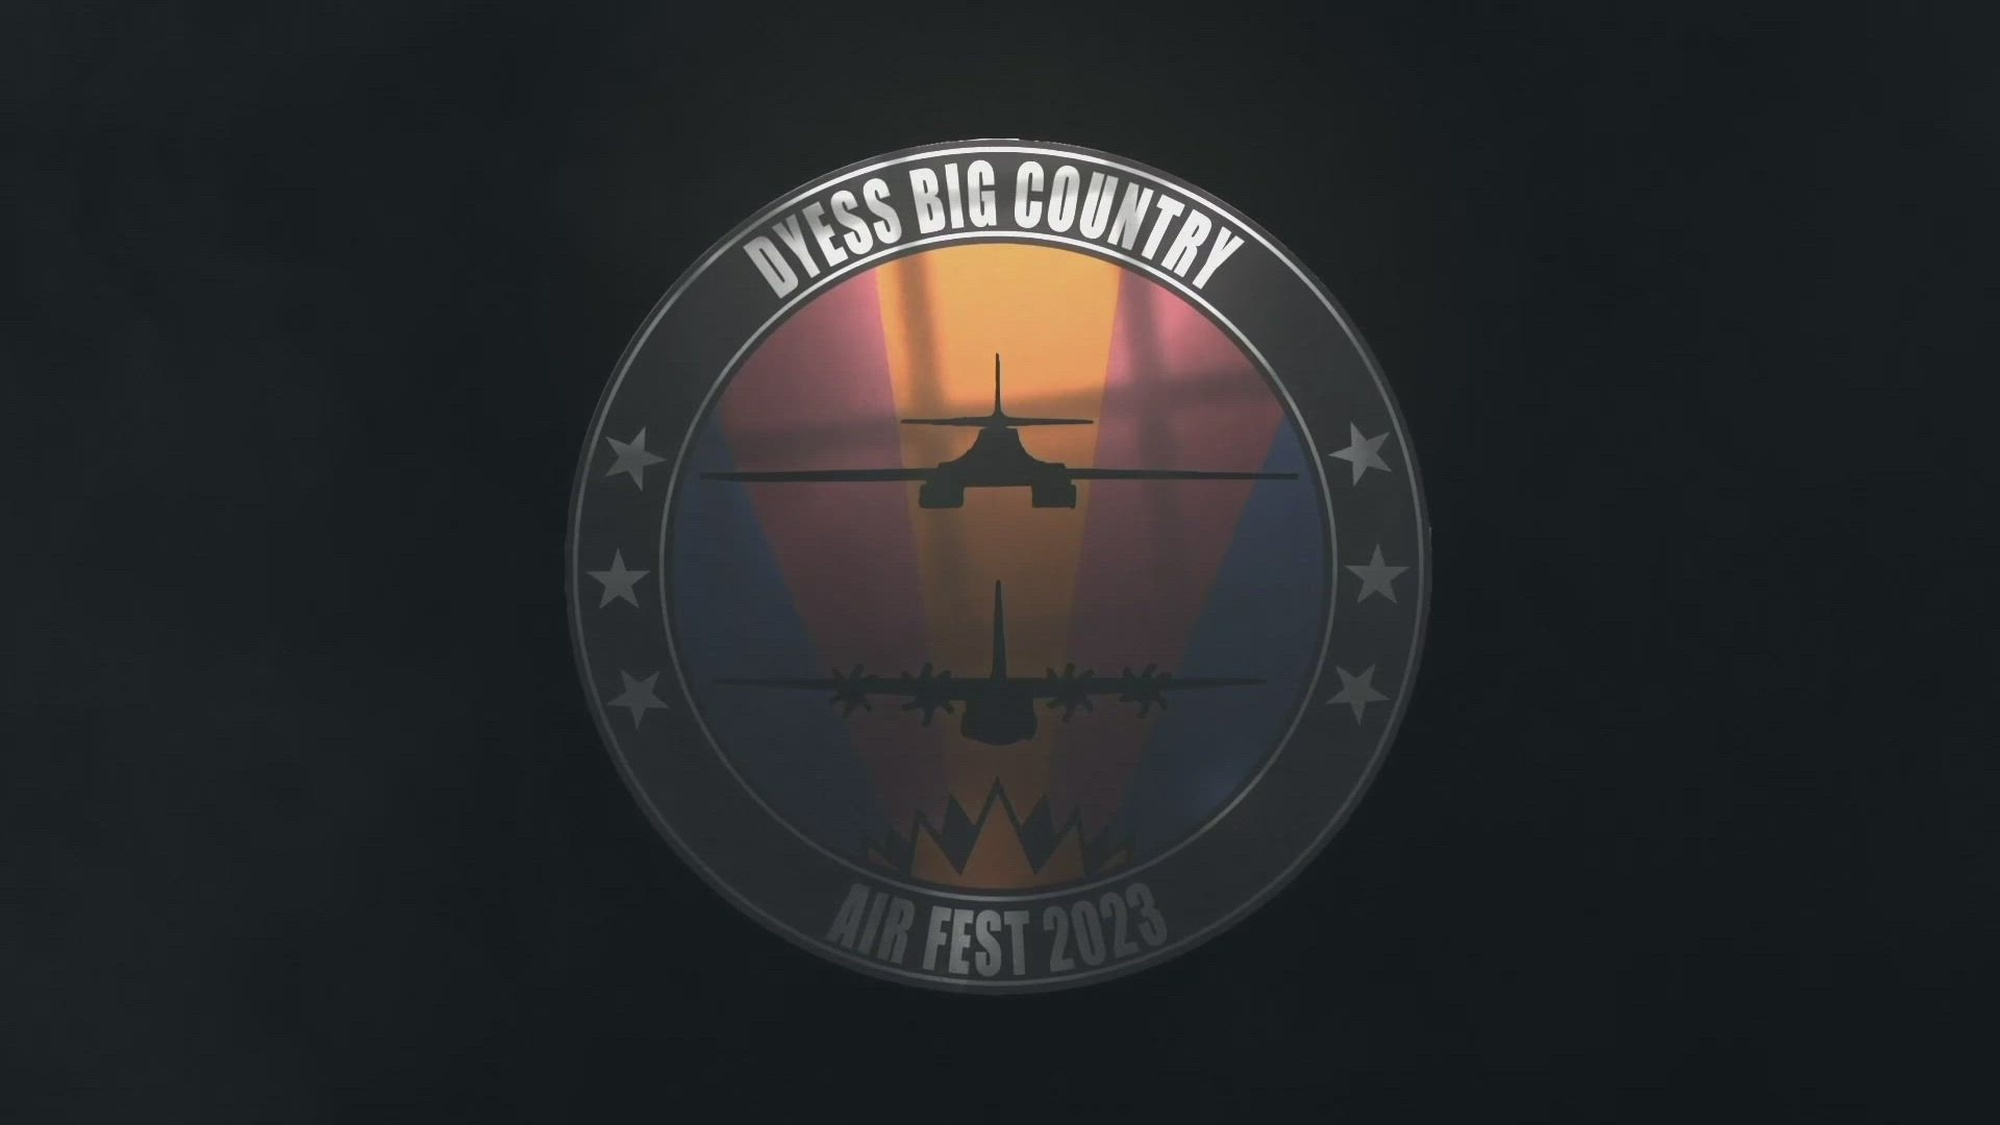 The Dyess Big Country Air Fest features a wide array of static displays available for the public. The Air Fest takes place on April 22, 2023.